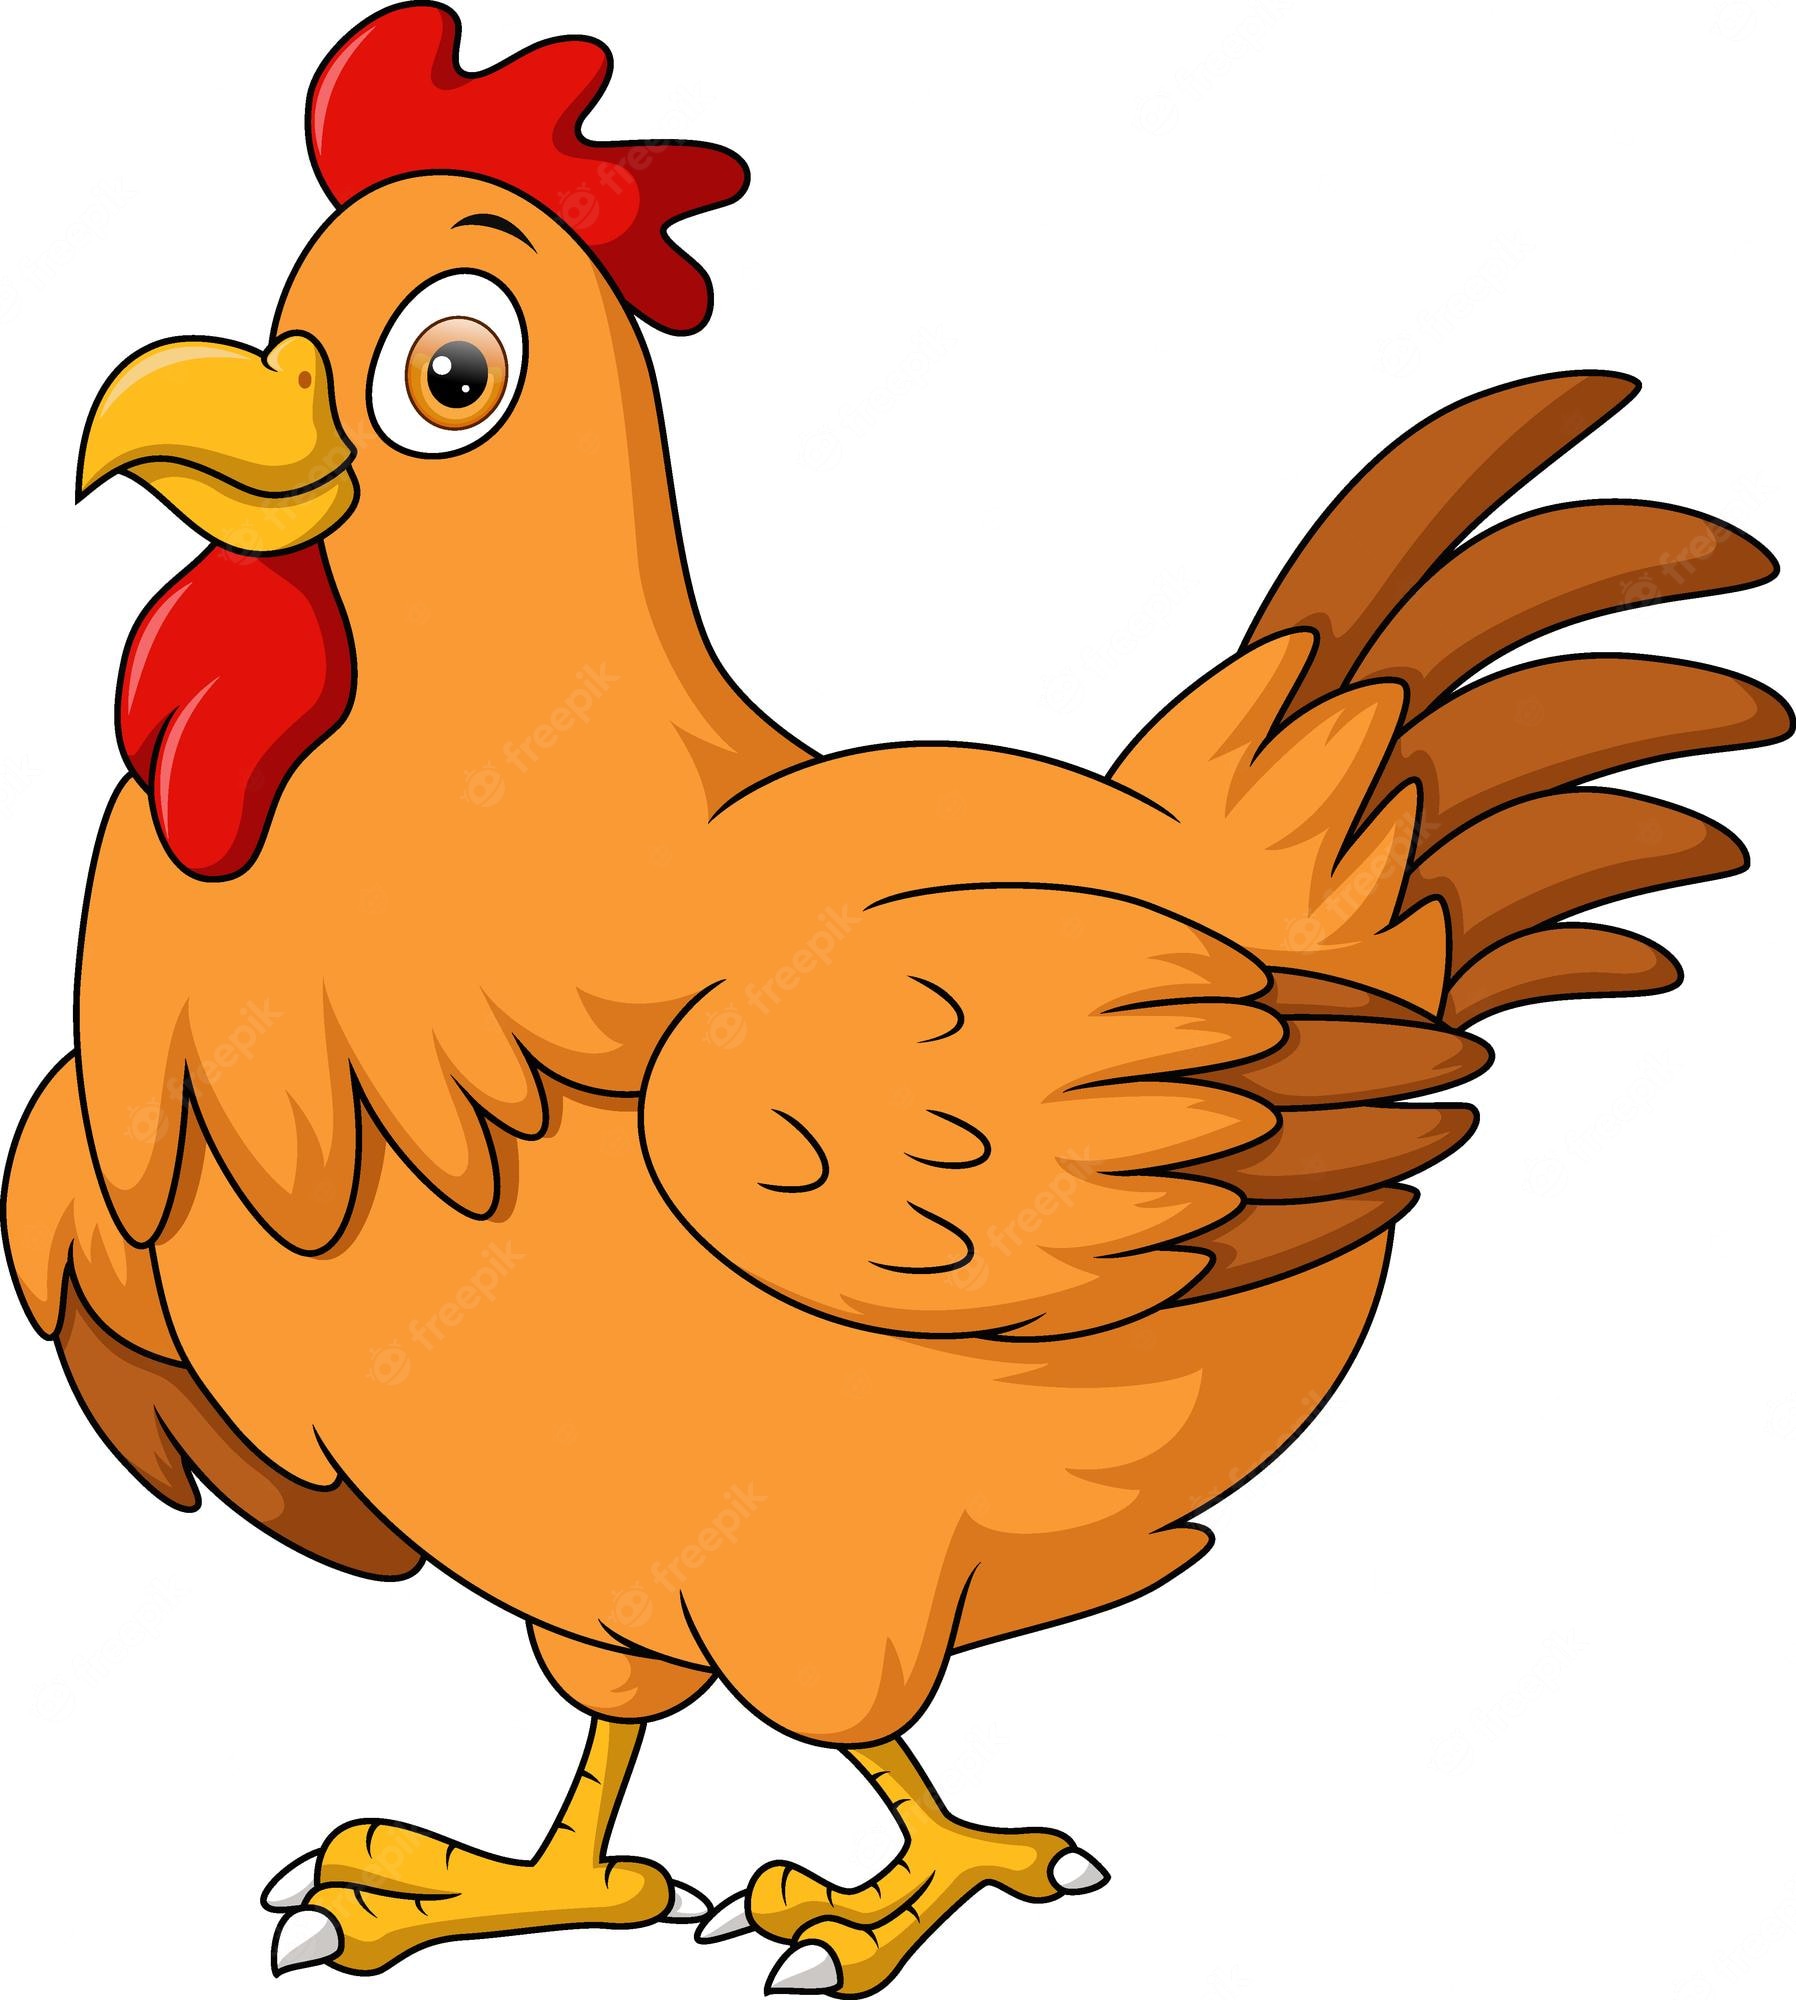 Chicken On White Background Stock Illustration - Download Image